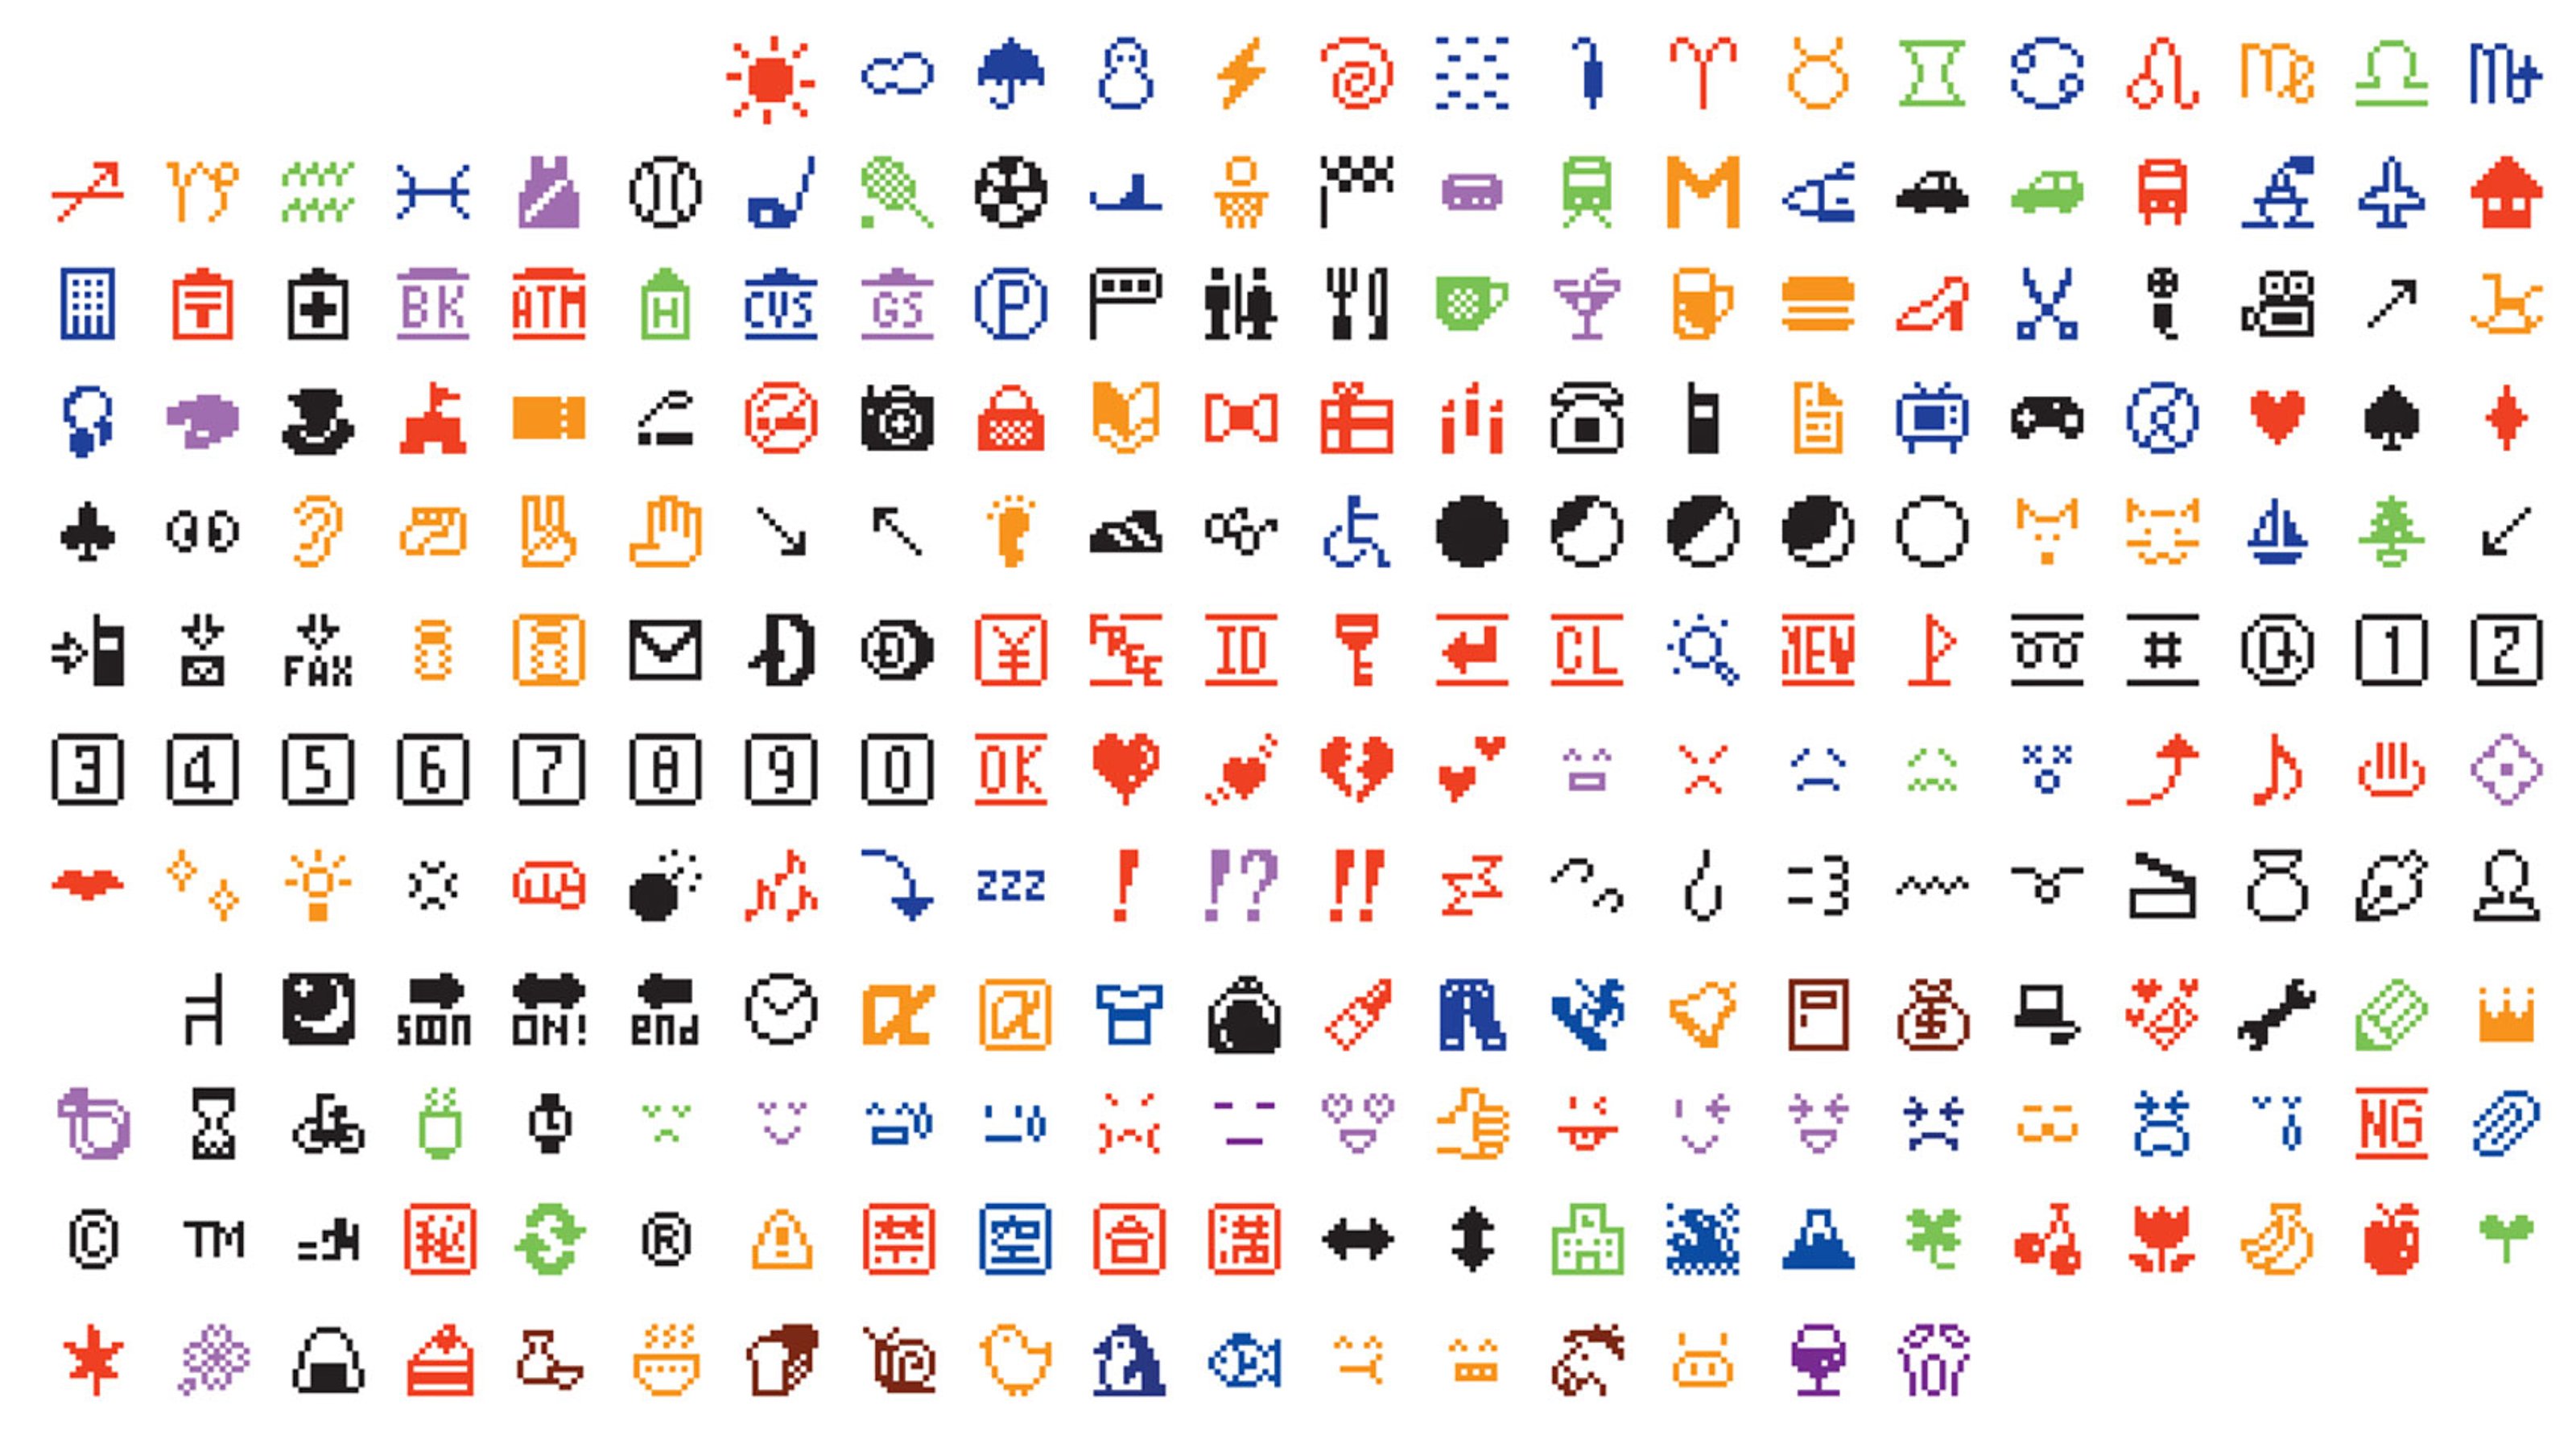 Japanese designer, Shigetaka Kurita's, original set of 176 emoji which was acquired by MoMA for the permanent collection